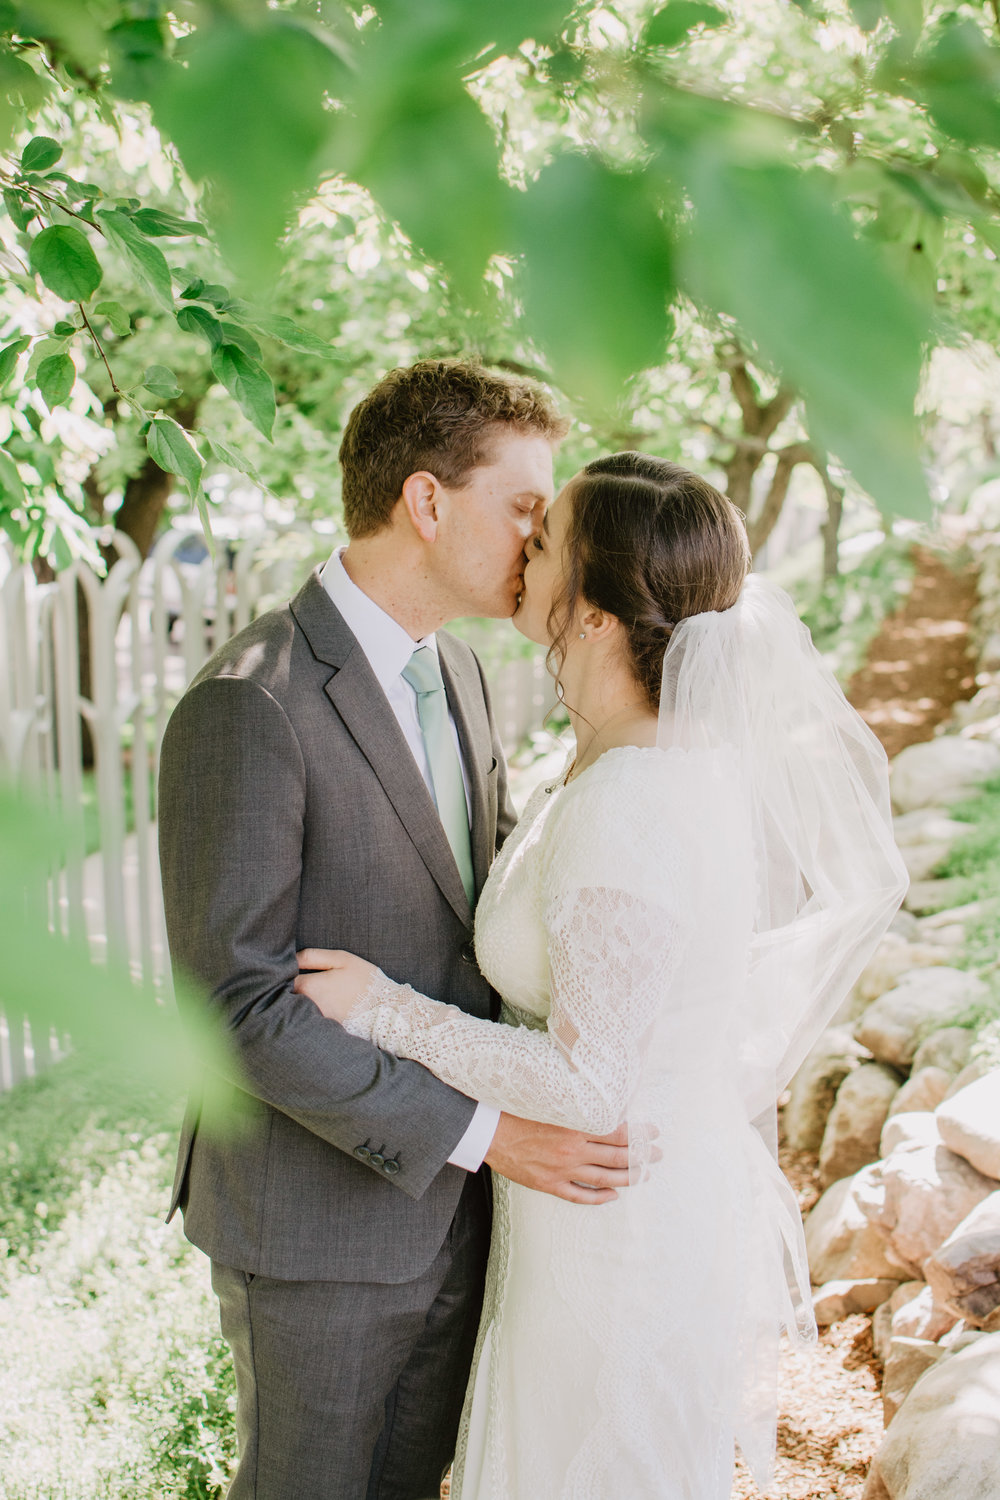 Jocilyn Bennett Photography | Utah Bride | LDS Bride | Utah Wedding Photography | When Two Become One | LDS civil wedding ceremony | Blending religions in families | Capturing Raw and Genuine Emotion | Combining Traditions | LDS Logan Temple | Temple Sealing | Bride and Groom | Bridals |